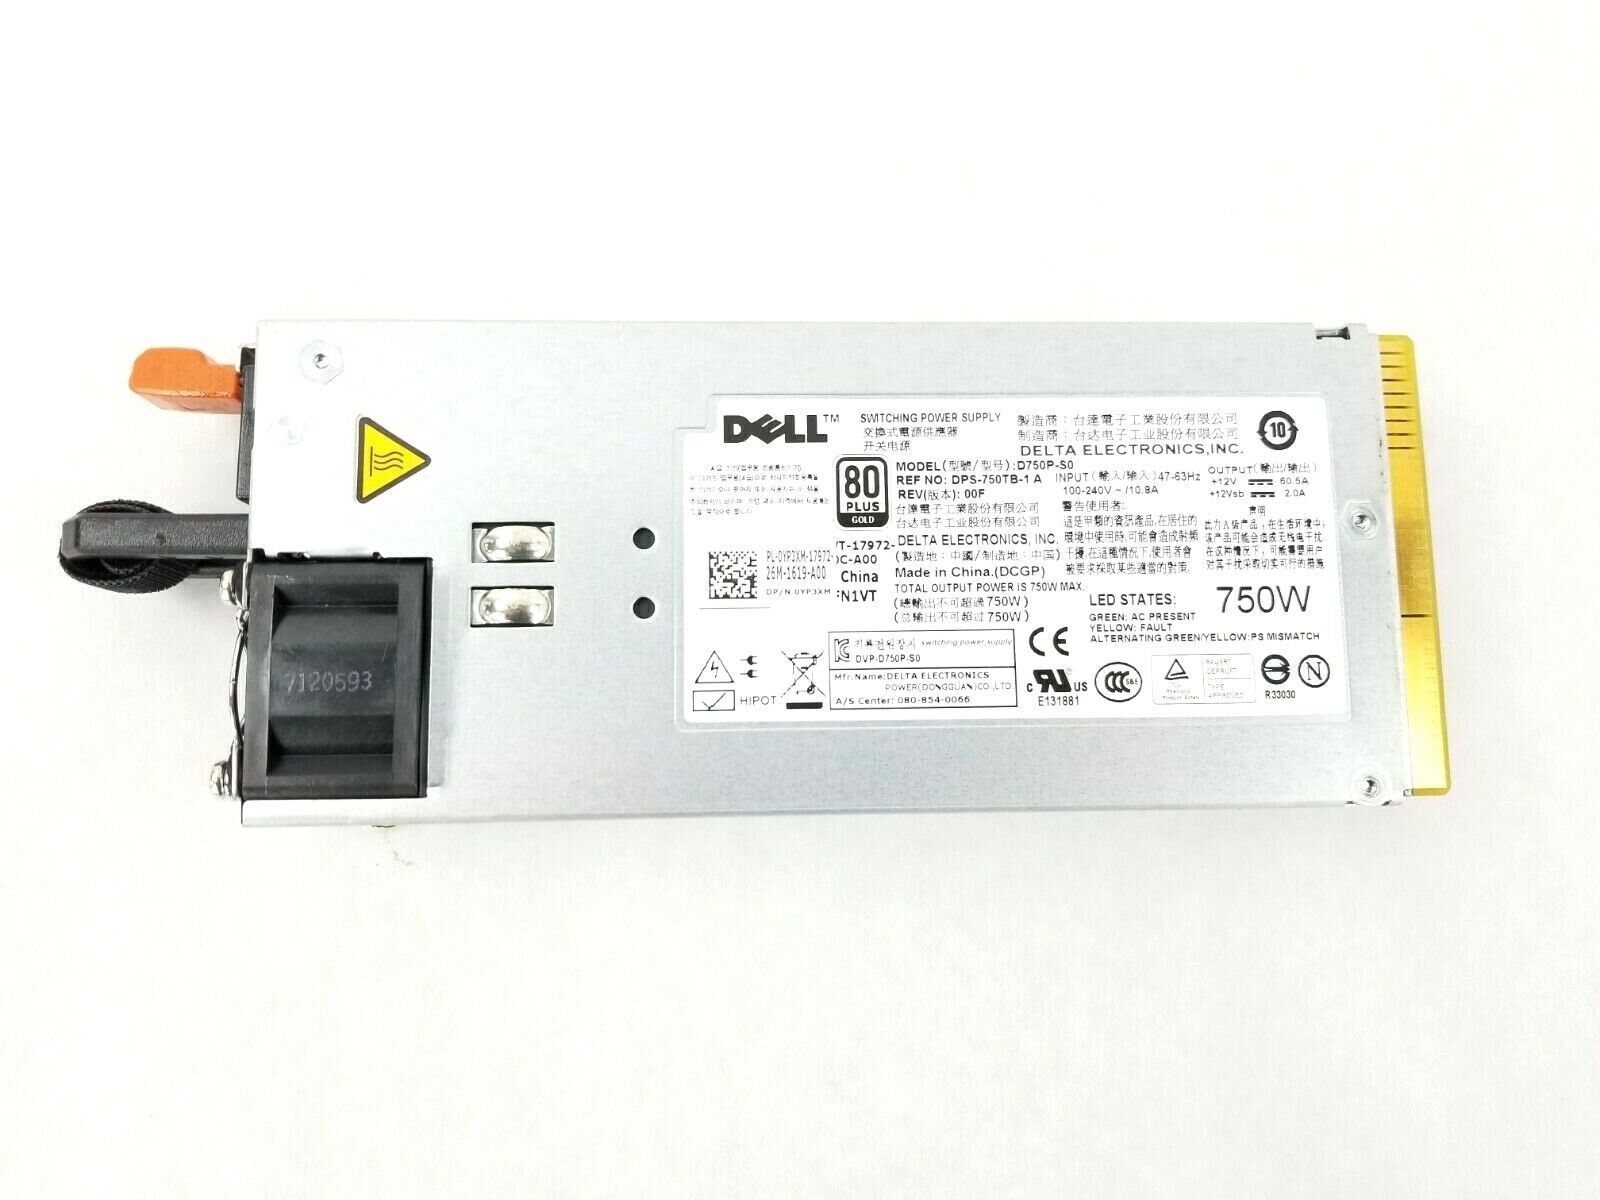 Dell YP3XM 750W Power Supply For Dell PowerEdge R510